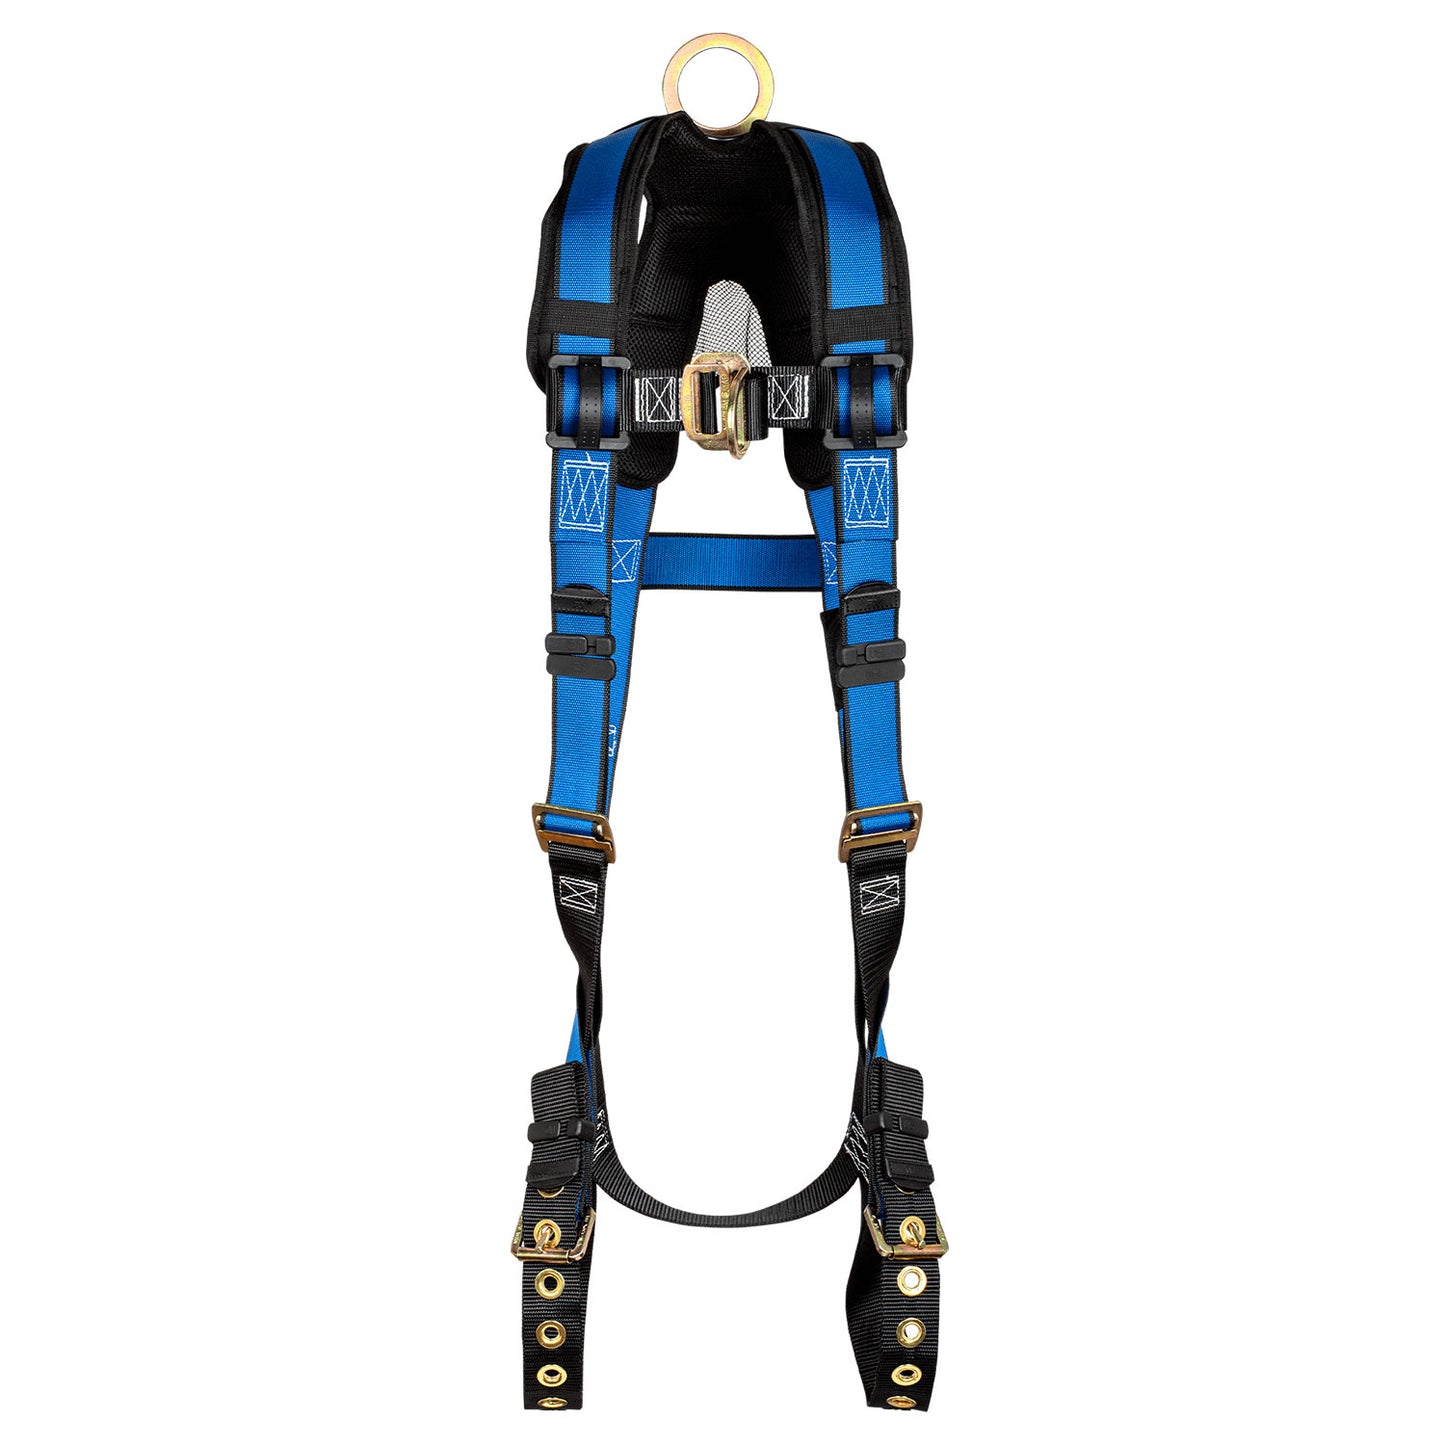 FallTech Contractor+ Full-Body Safety Harness | Non-Belted | XL/2XL | 7016BX/2X